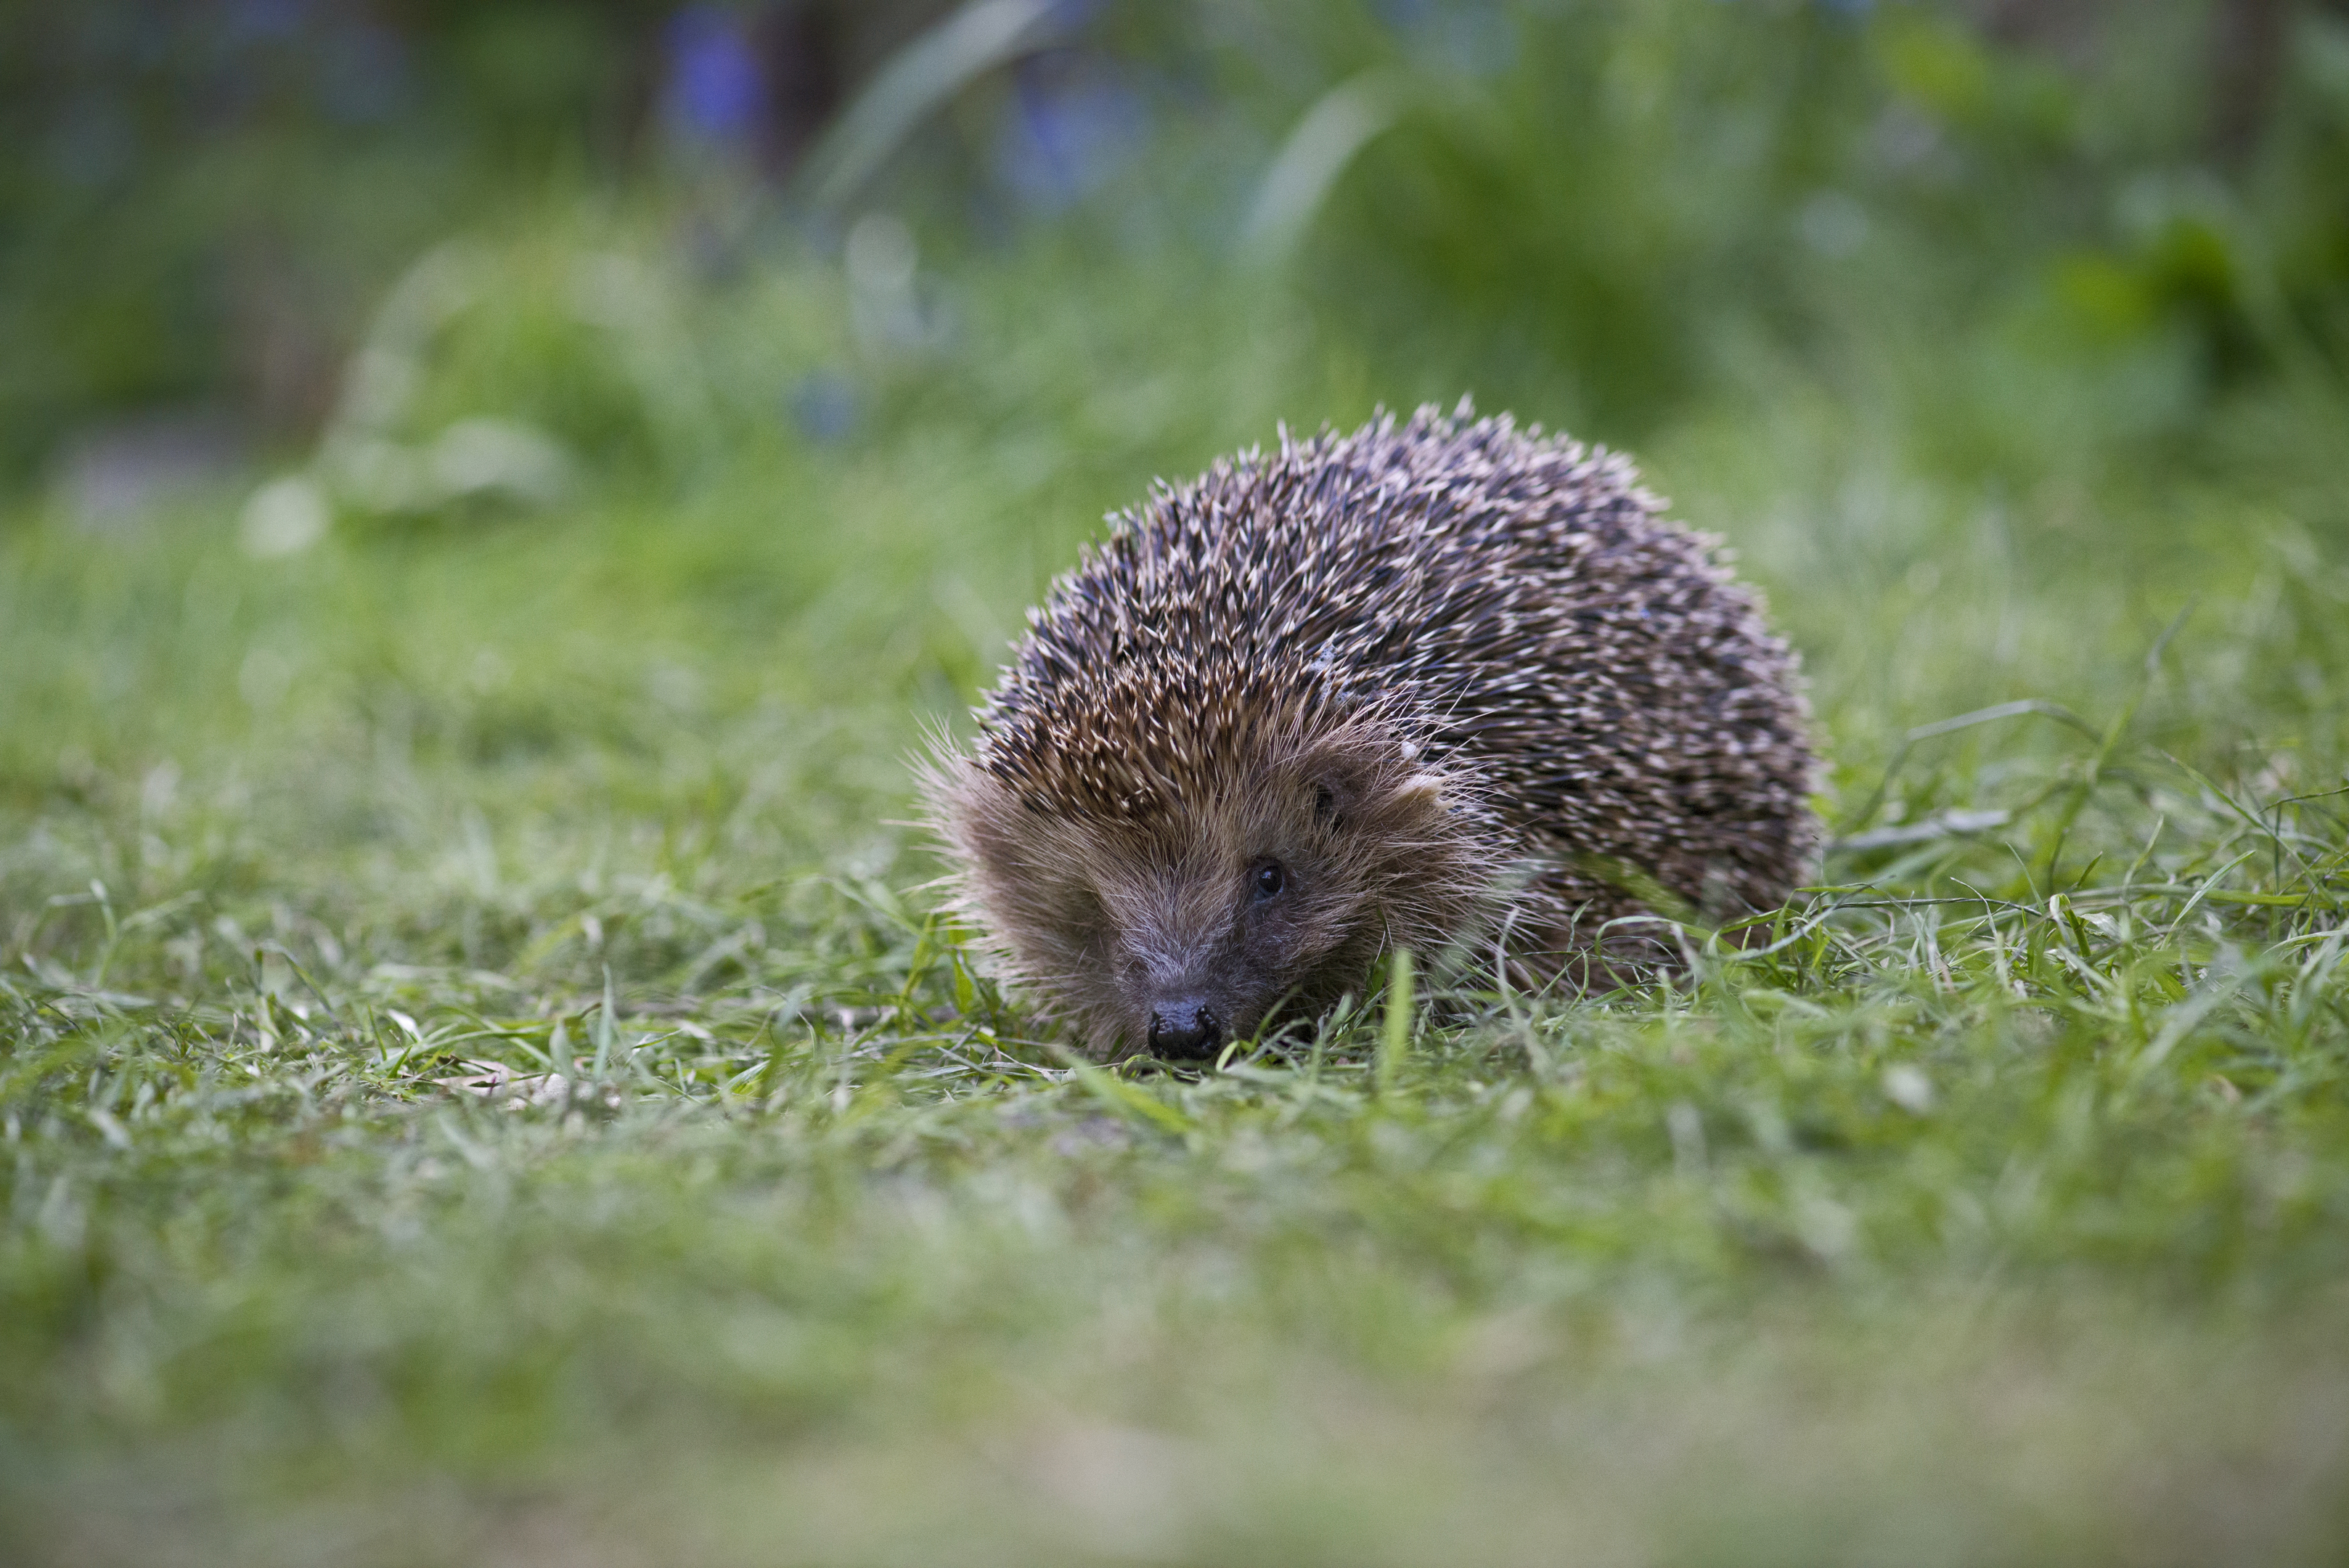 Hedgehogs were spotted in more than half of Scottish gardens last year (Eleanor Bentall, RSPB)